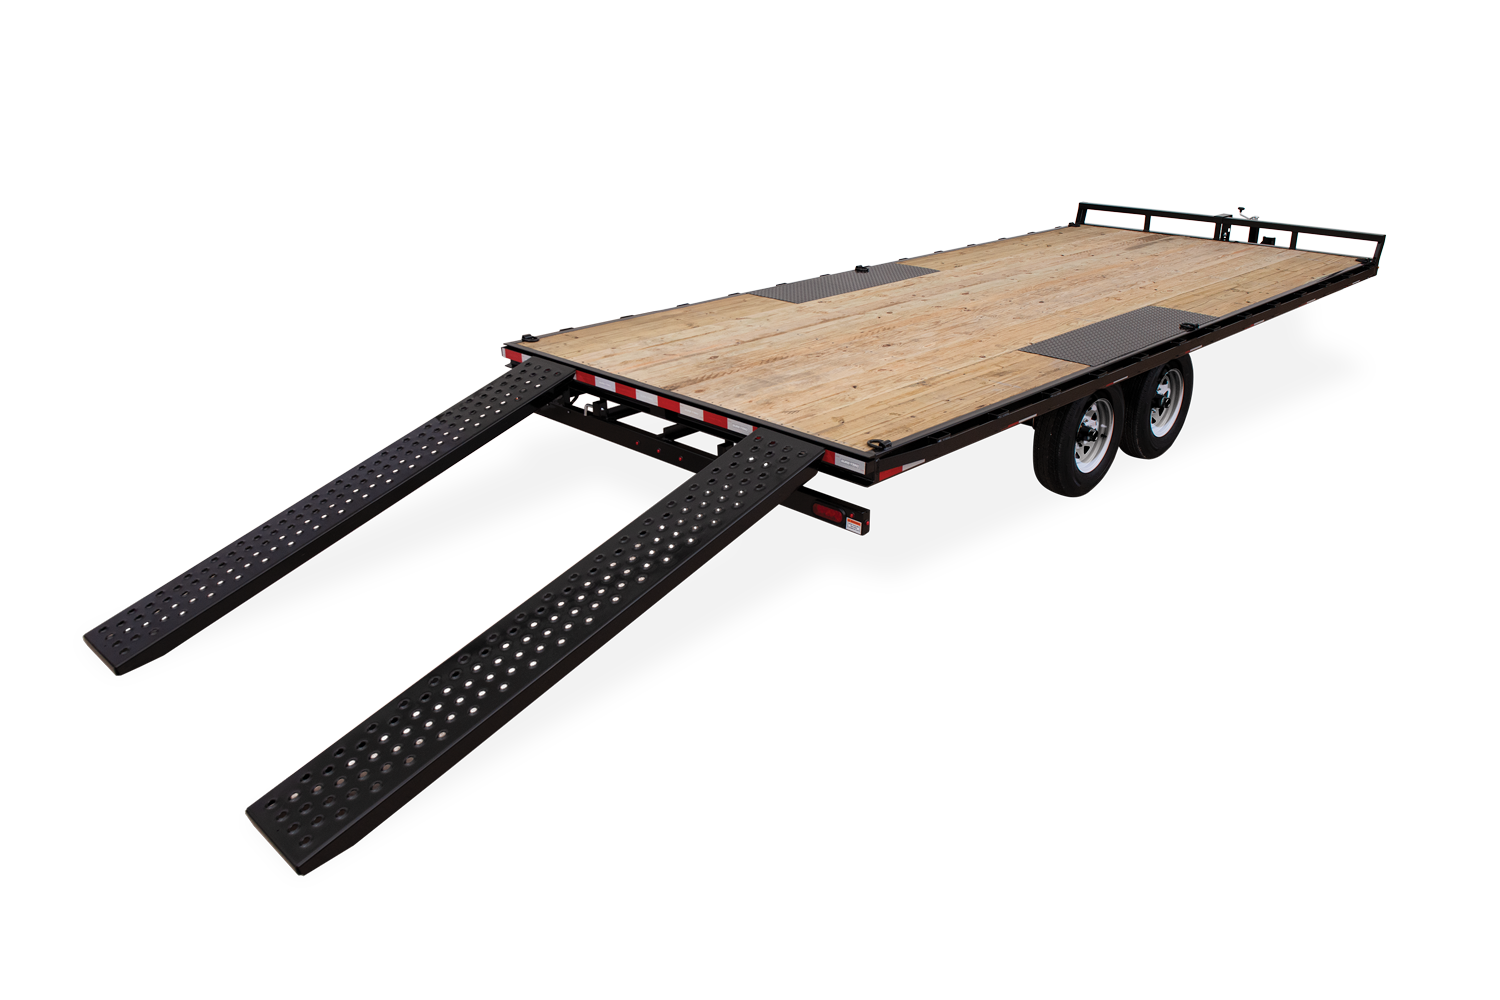 Sure-Trac | Image | Rear View of the Low Profile Flatbed Deckover with ramps down